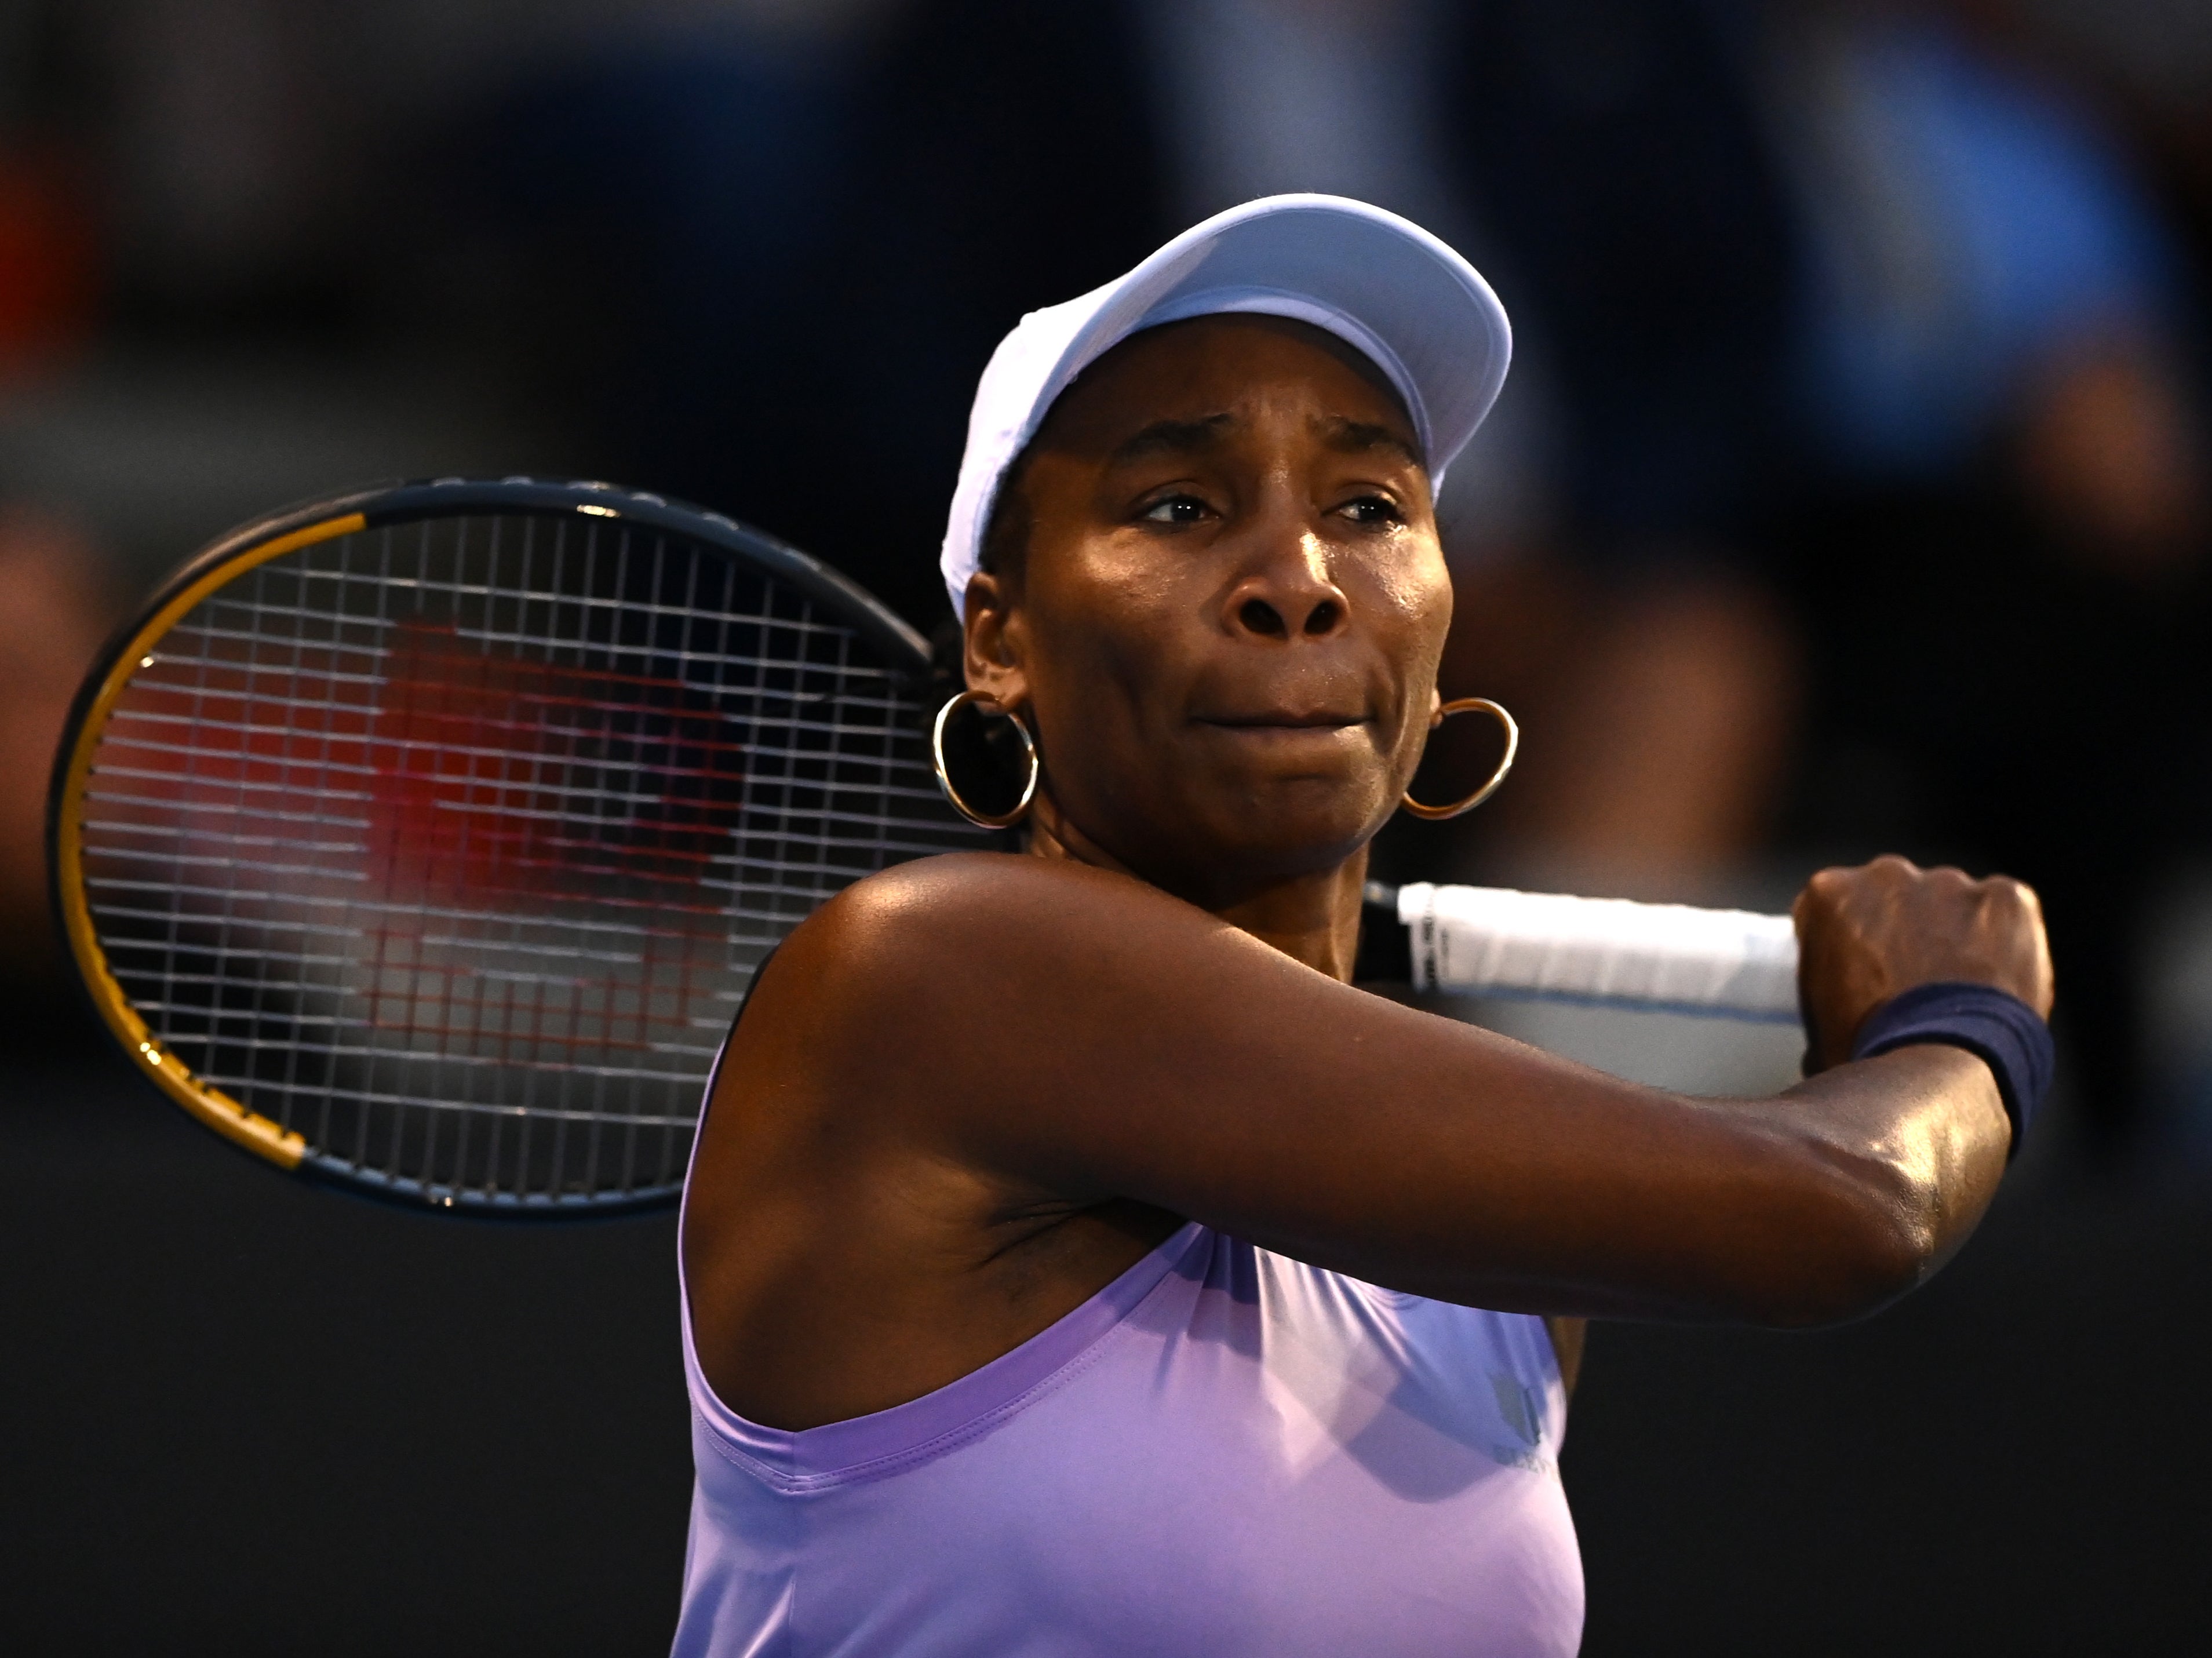 Venus Williams suffered a hamstring injury at the Auckland Classic